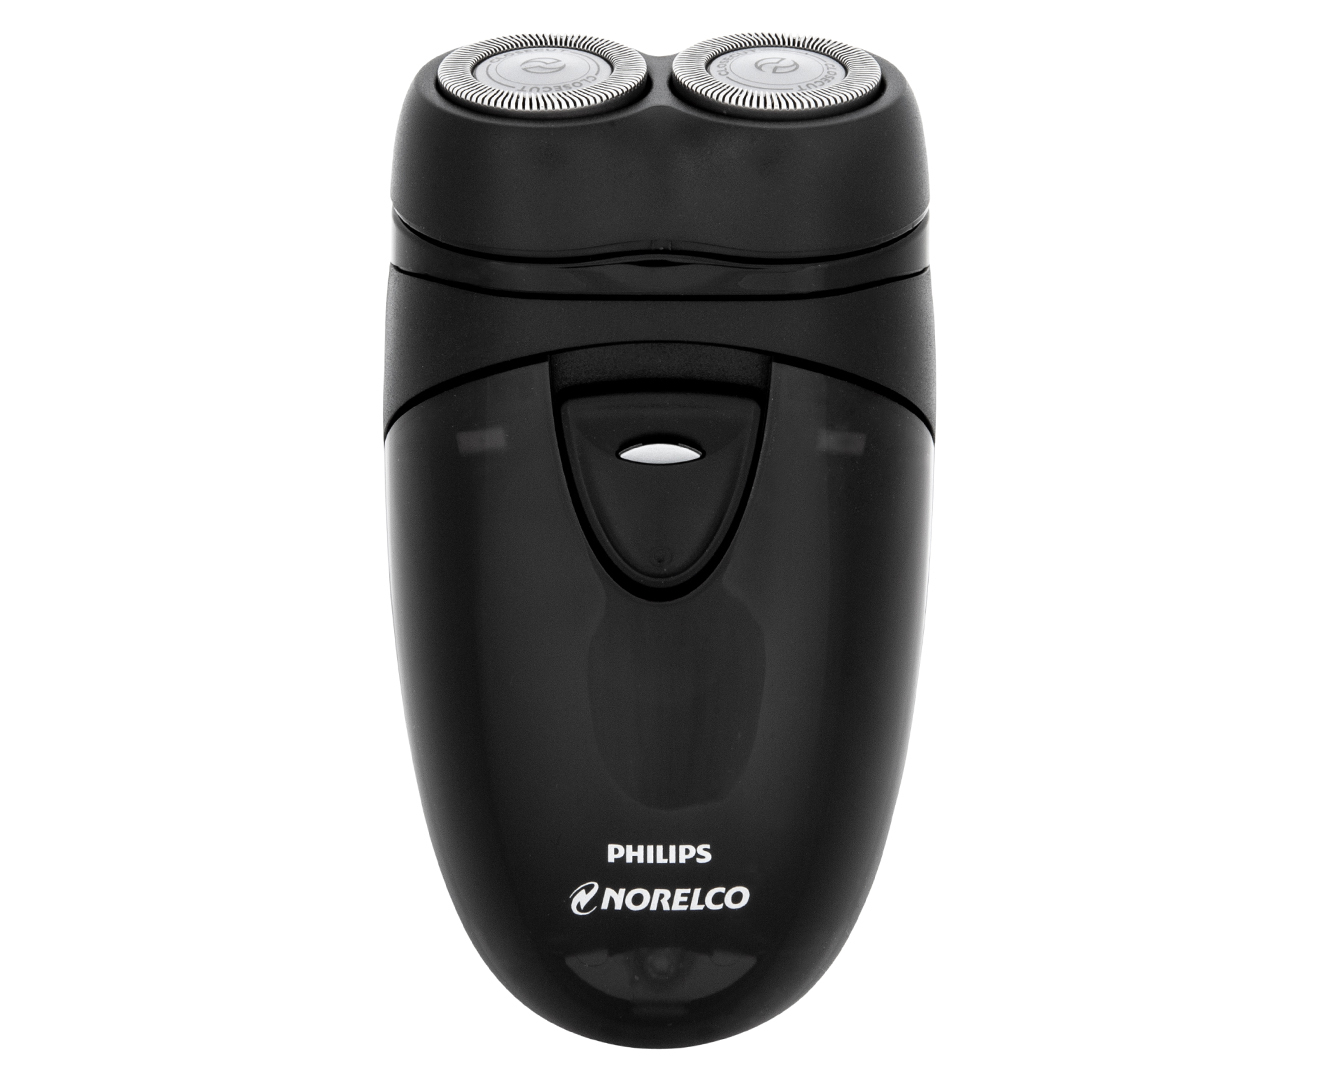 philips-norelco-travel-electric-shaver-black-pq208-catch-co-nz